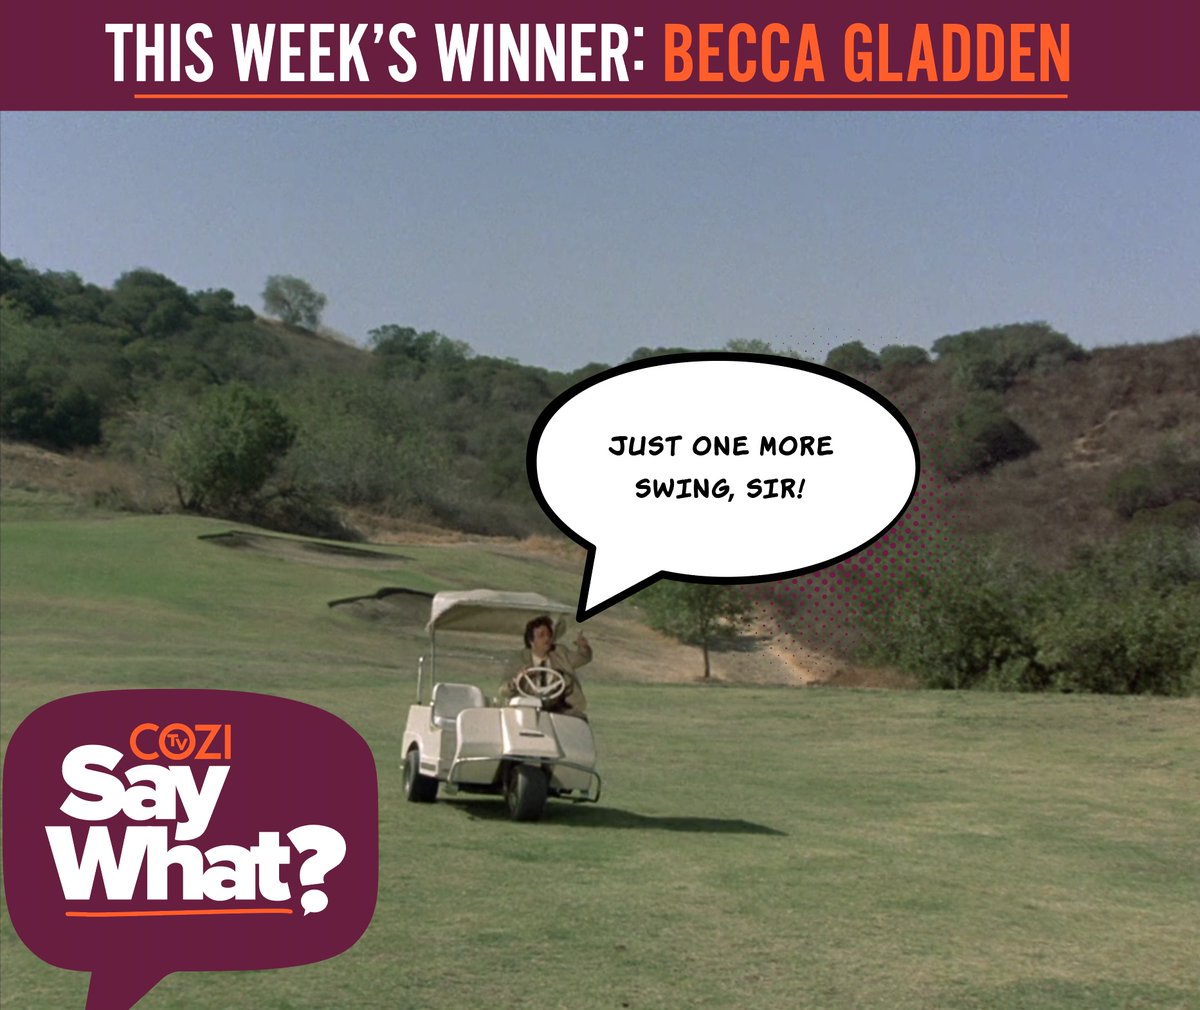 This week's #COZISayWHAT winner put a swing in the old 'just one more thing' trope and we thought it was a hole in one! Let's give a round of applause to Becca Gladden winner of a COZI TV red coffee mug!